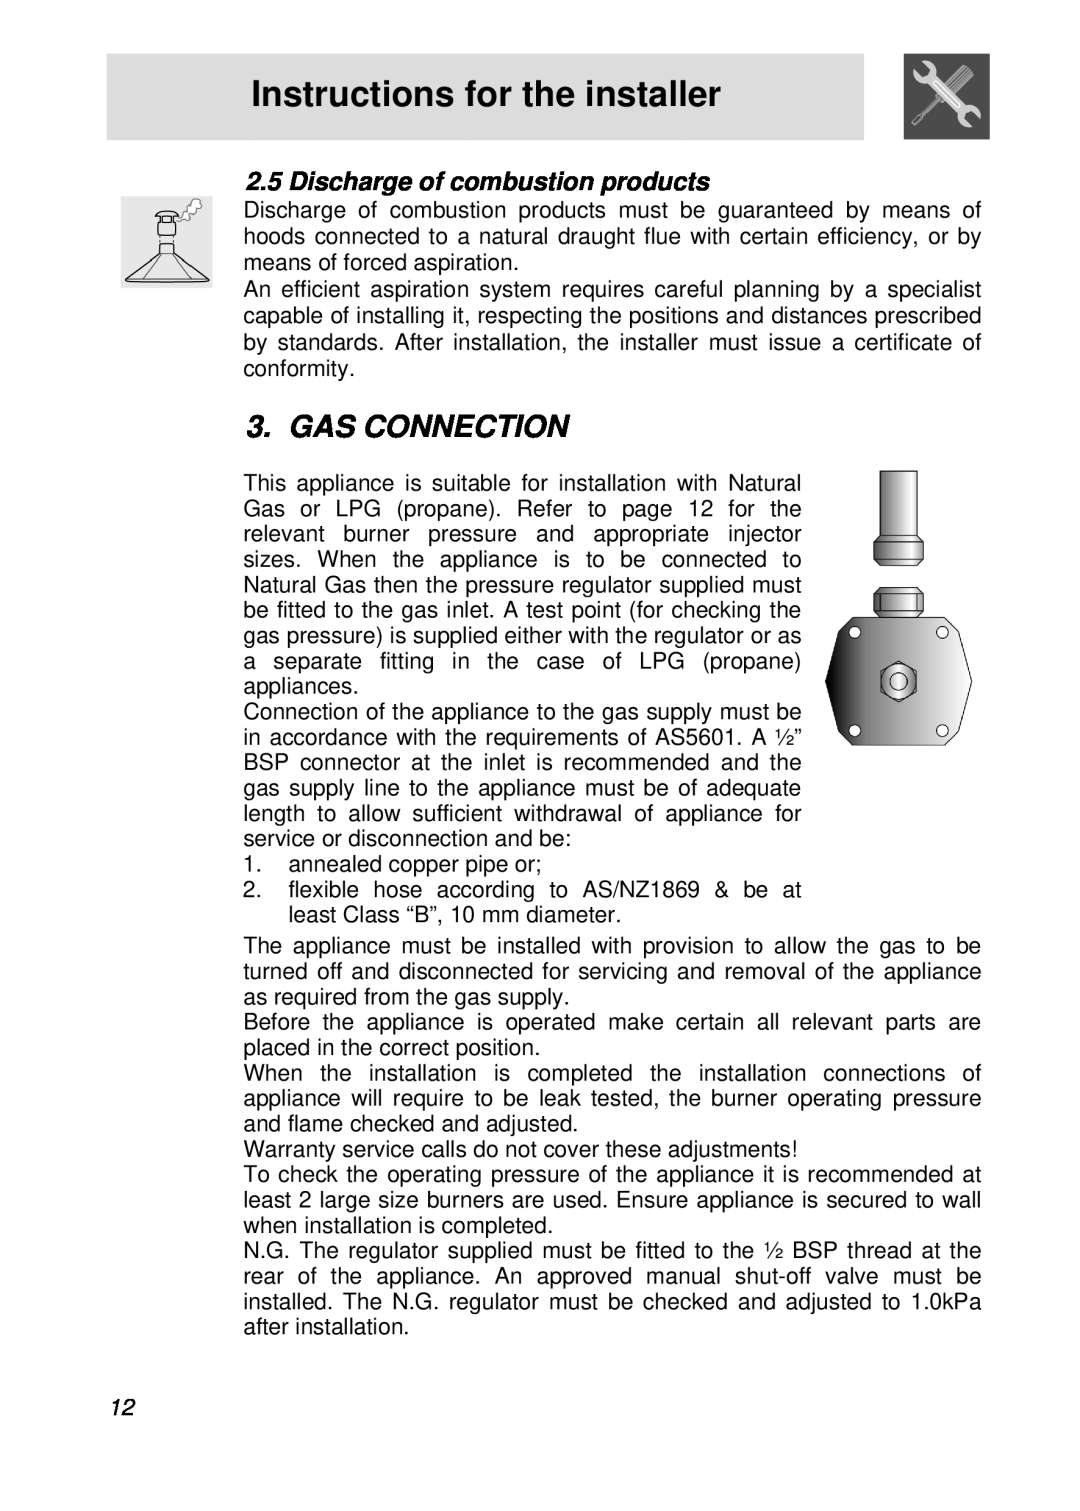 Smeg PGFA95F-1 manual Gas Connection, Discharge of combustion products, Instructions for the installer 